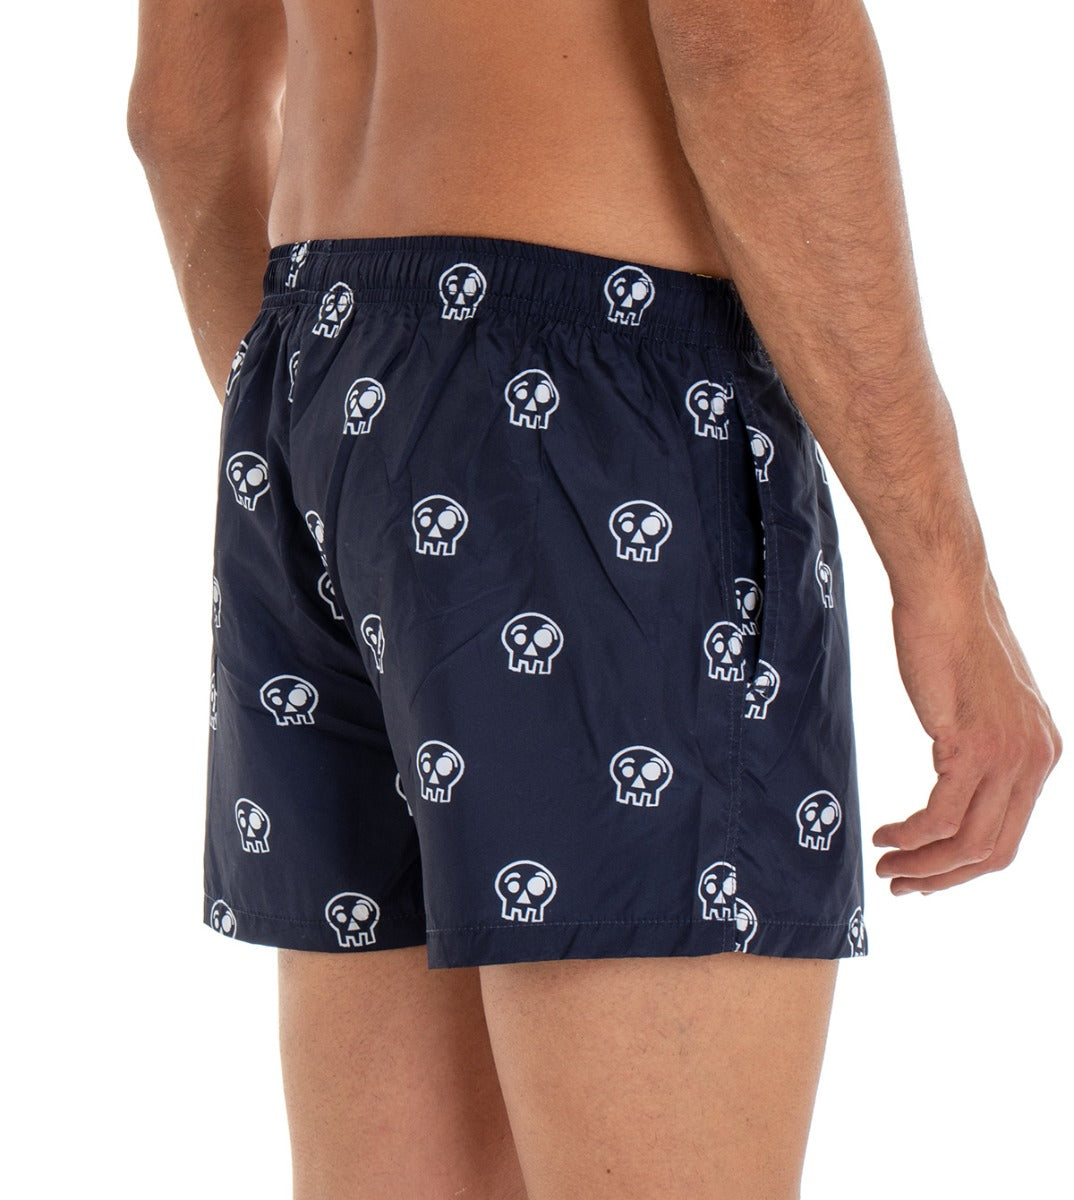 Men's Blue Boxer Swimsuit with Elastic Skull Prints GIOSAL-SU1151A